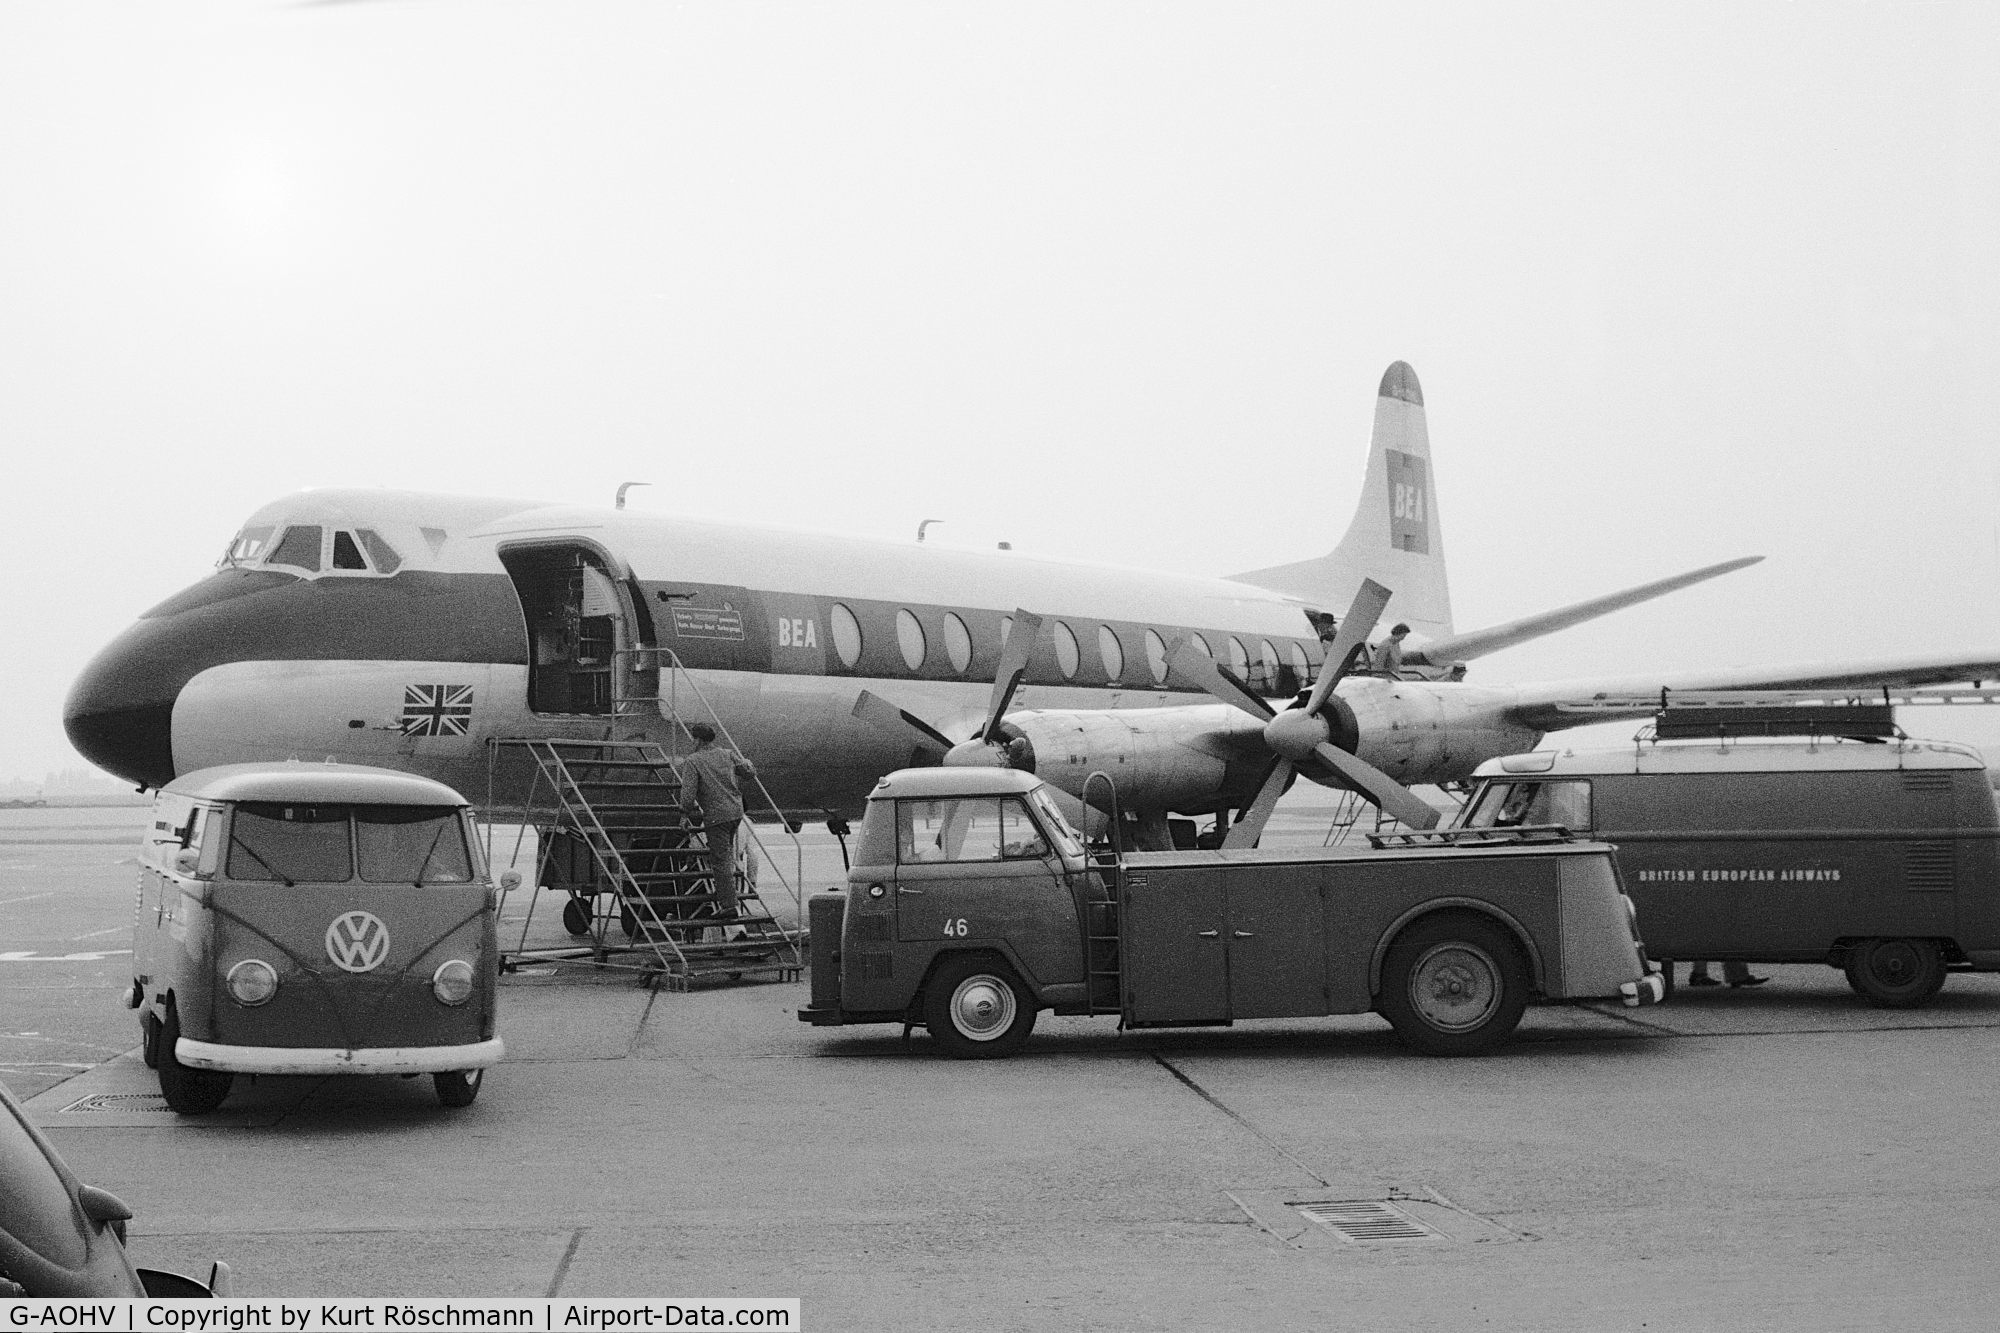 G-AOHV, 1957 Vickers Viscount 802 C/N 170, Berlin airport, ready for the flight back to Düsseldorf